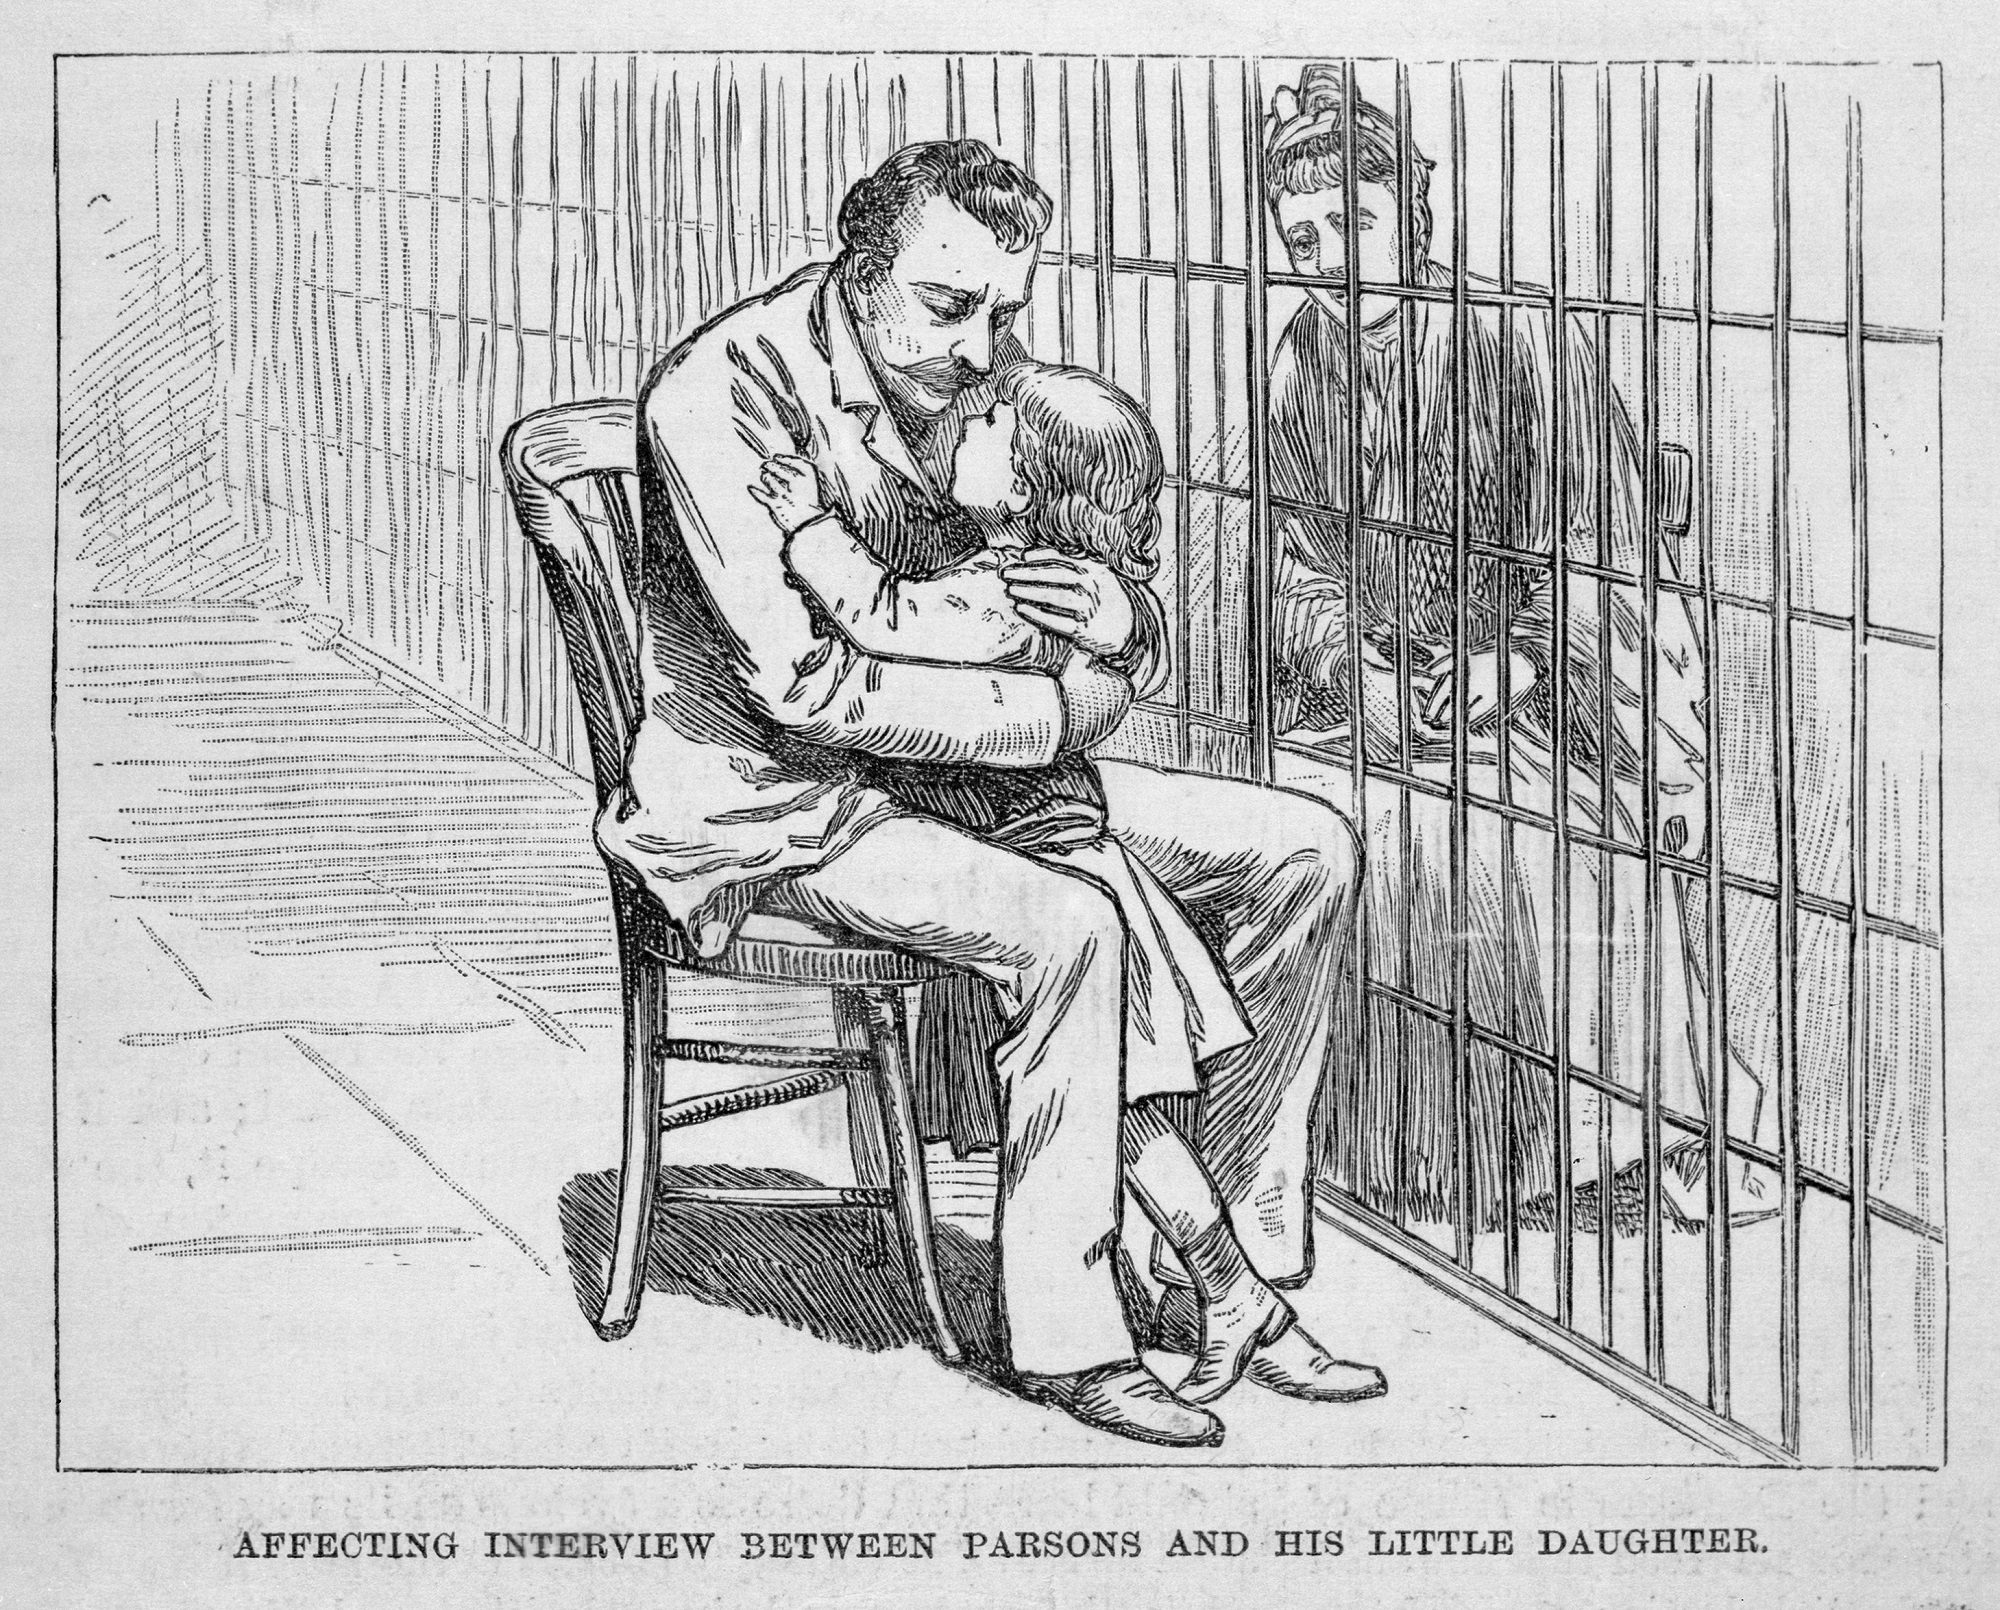 Sketch of Albert Parsons hugging daughter in jail after Haymarket Affair arrest, Chicago, Illinois, 1887. Caption reads Affecting interview between Parsons and his little daughter published in Frank Leslie's Illustrated Newspaper Nov. 12, 1887.